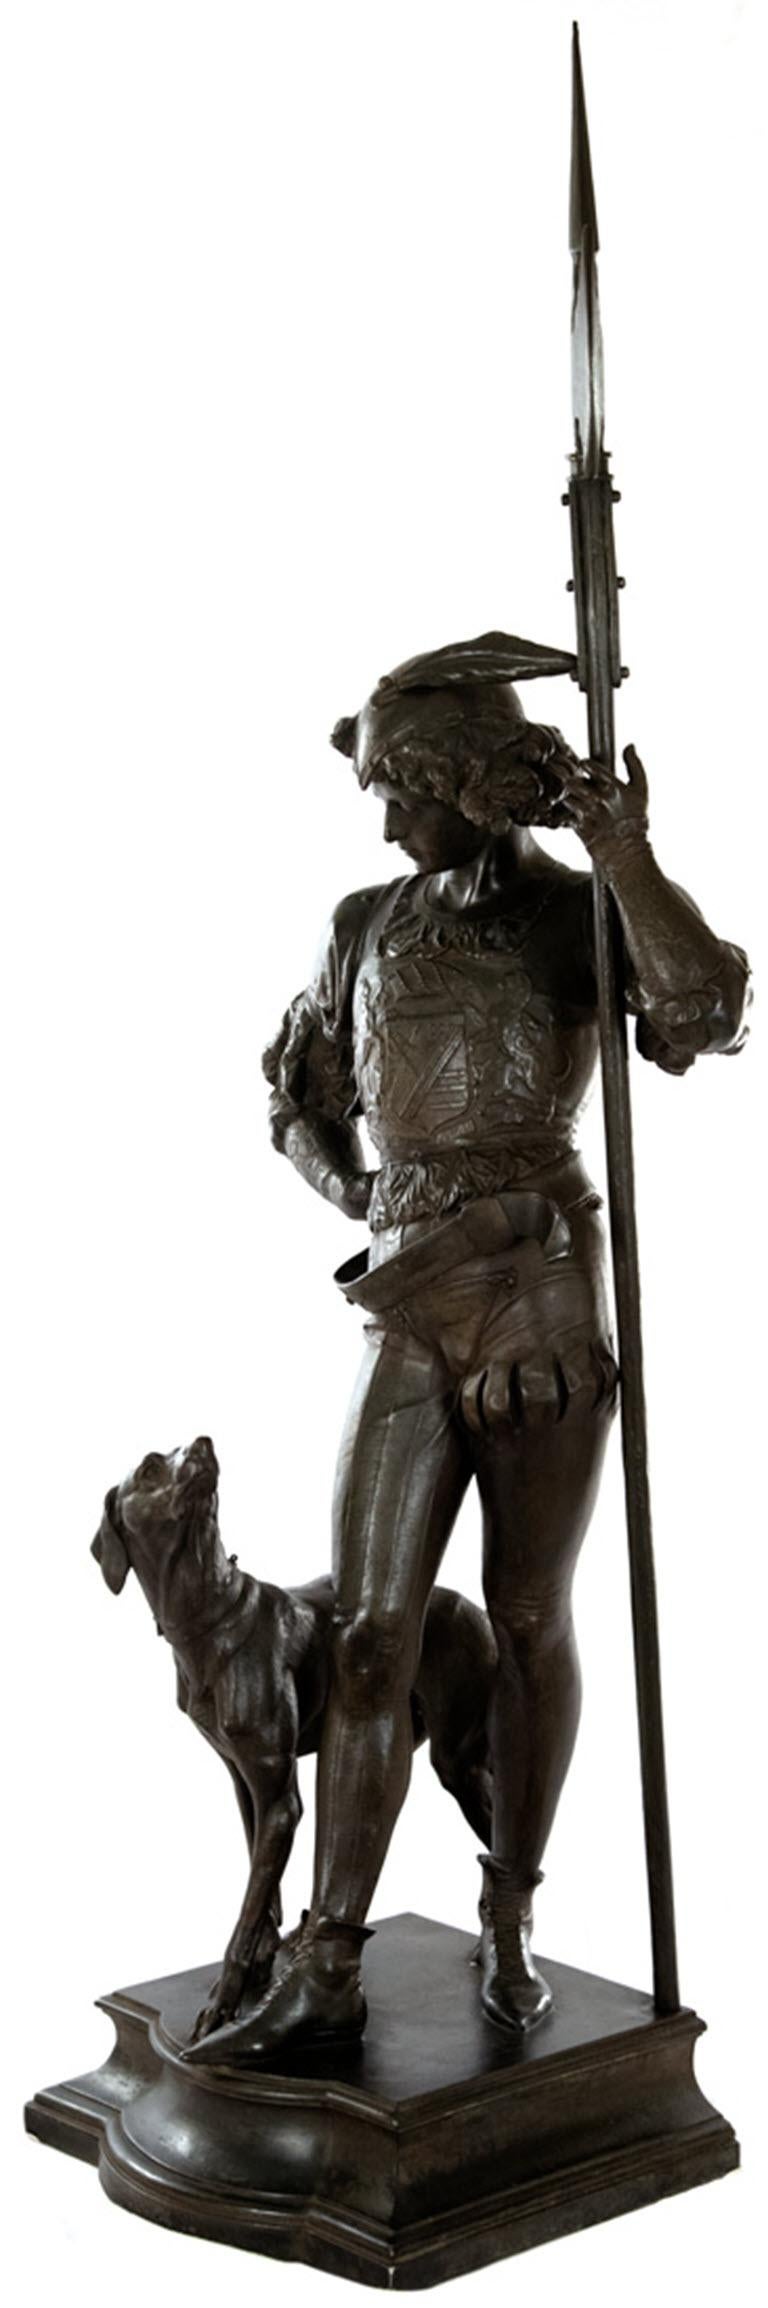 A very fine unmarked and unsigned sculpture of a young guard in Renaissance period costume standing contraposto while holding a spear and standing on a plinth alongside a beautifully modeled dog.

Measures: 58 1/2 x 20 1/2 x 15 in.